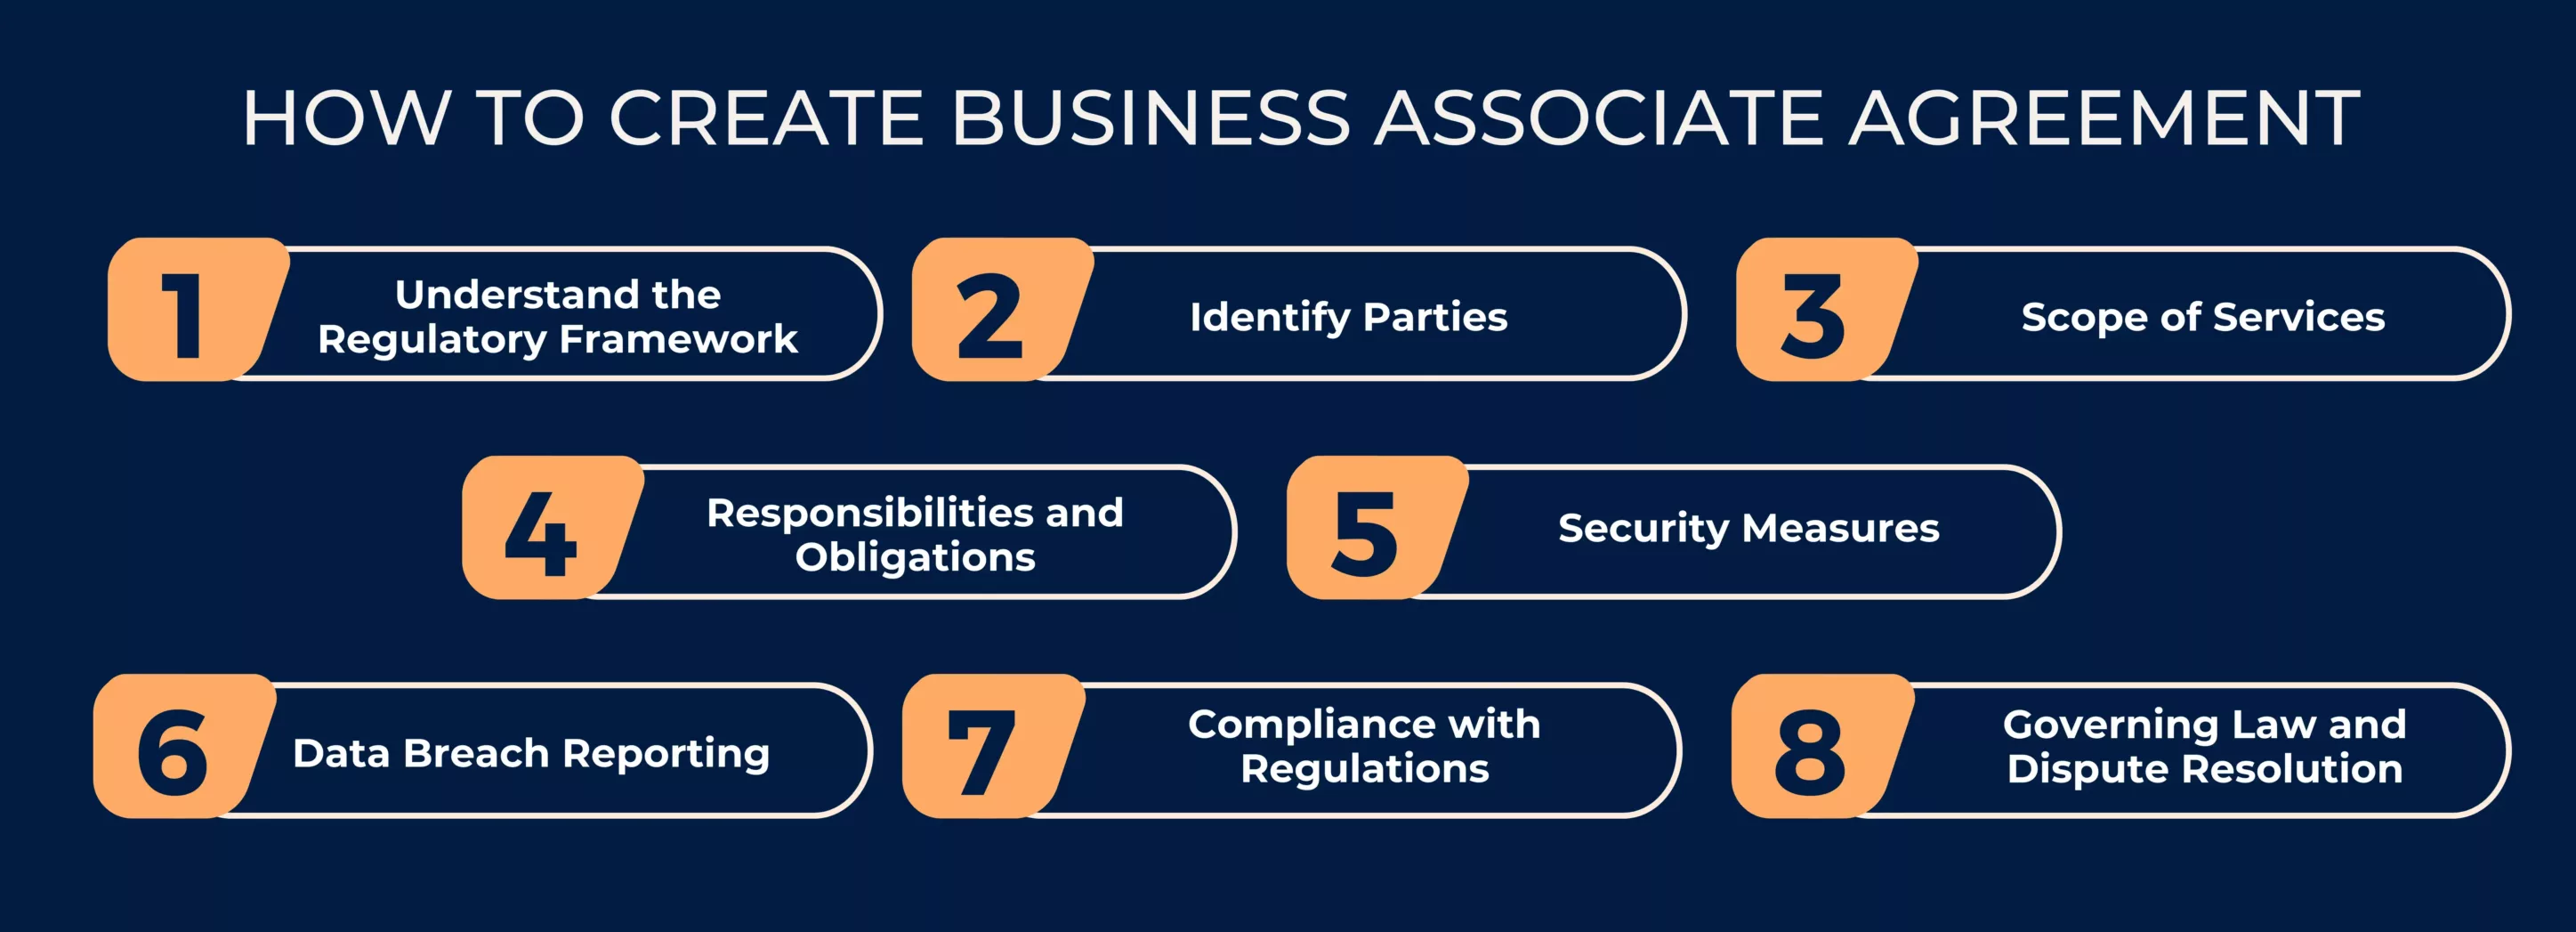 How to create business Associate agreement